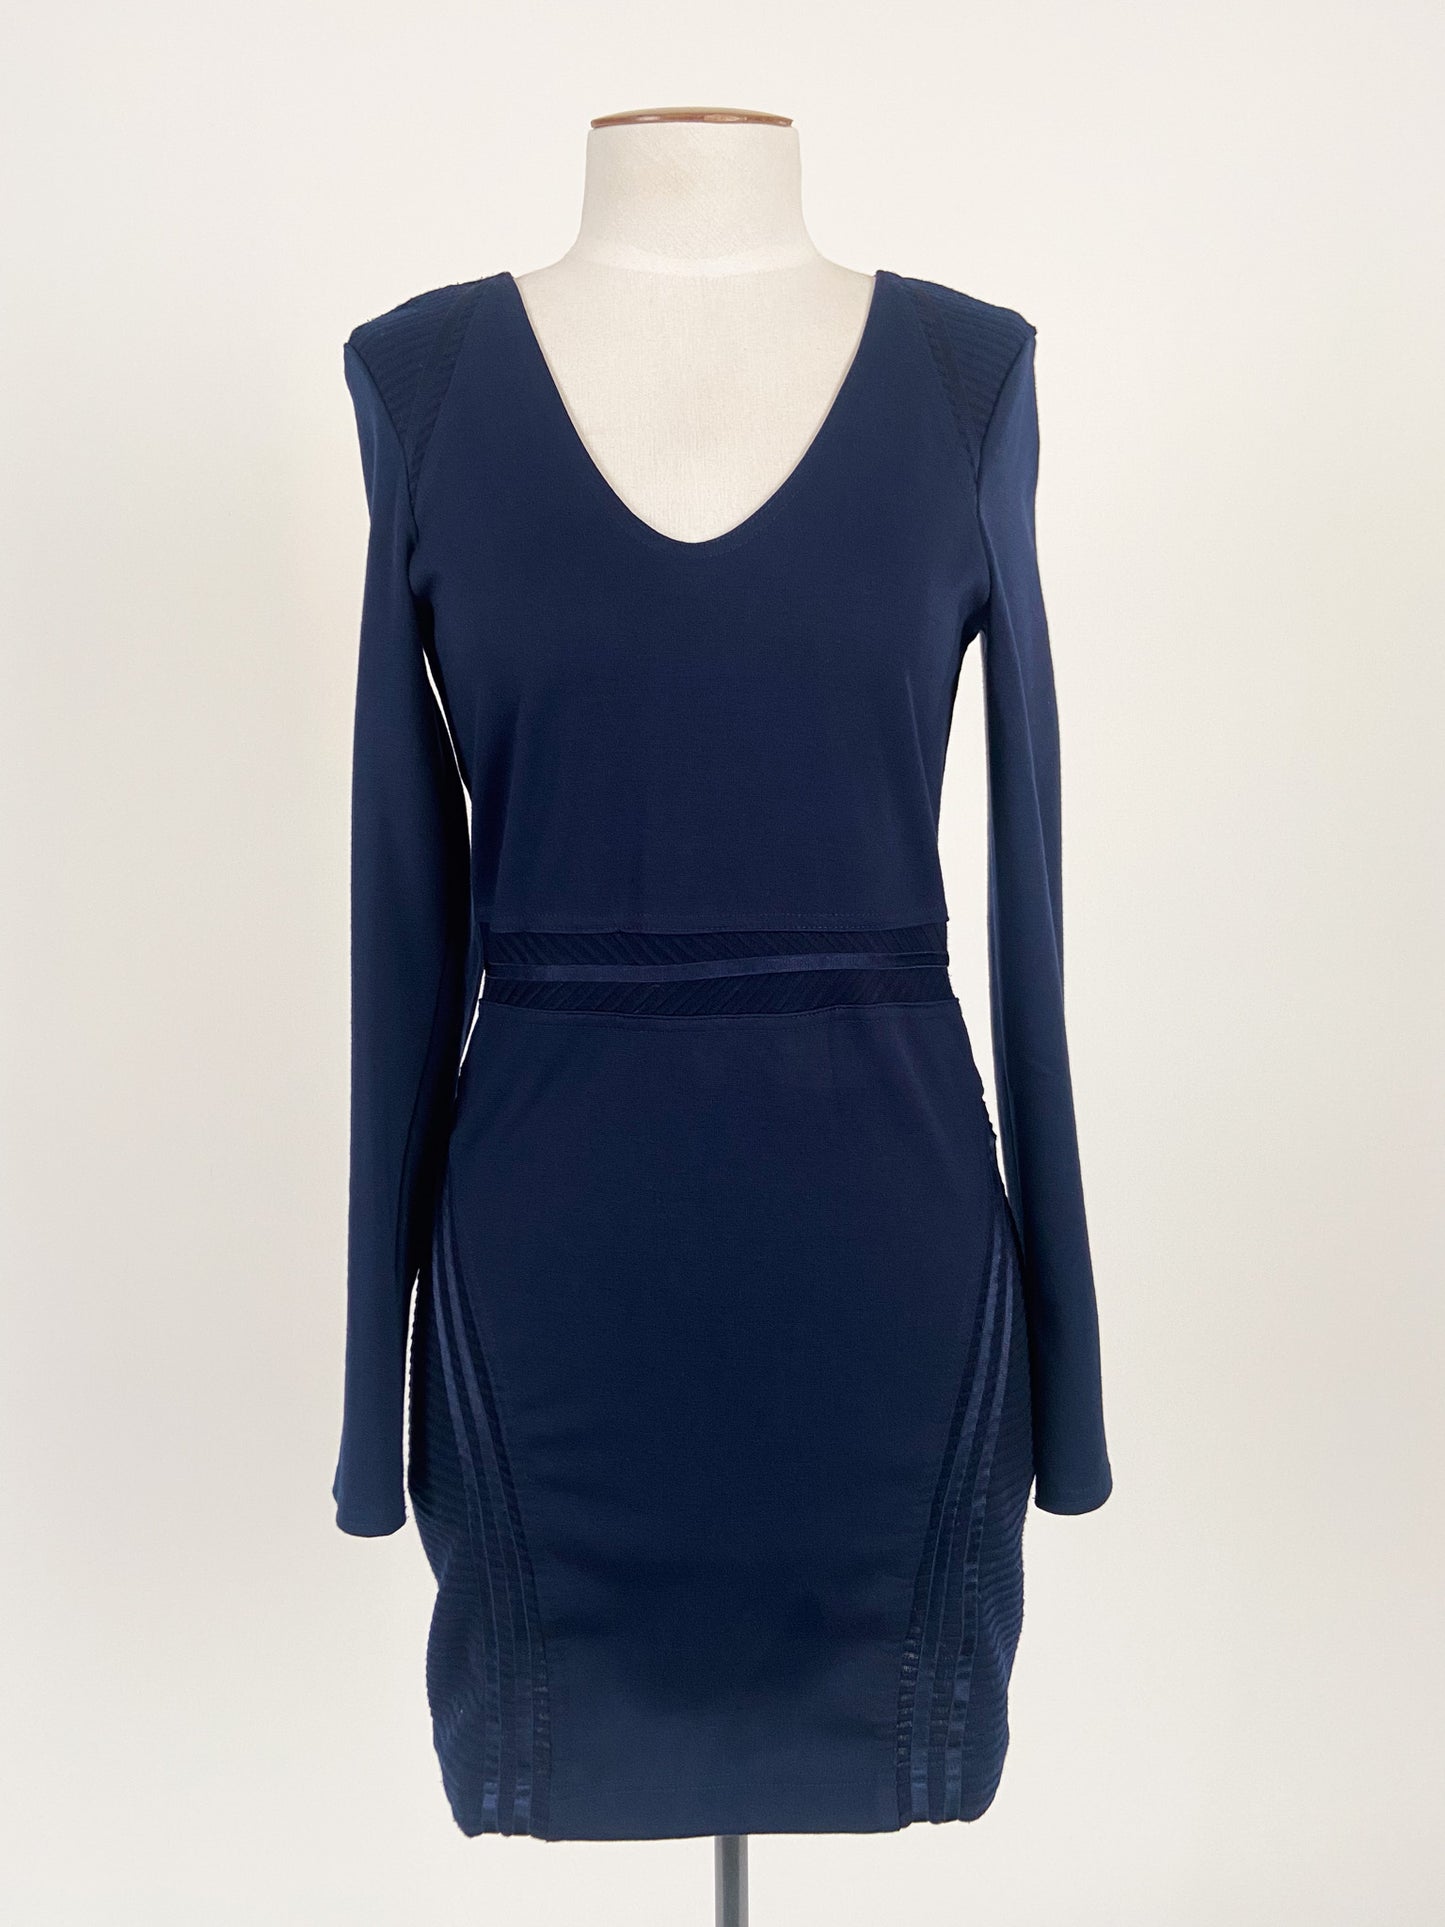 Finders Keepers | Navy Formal/Workwear Dress | Size S